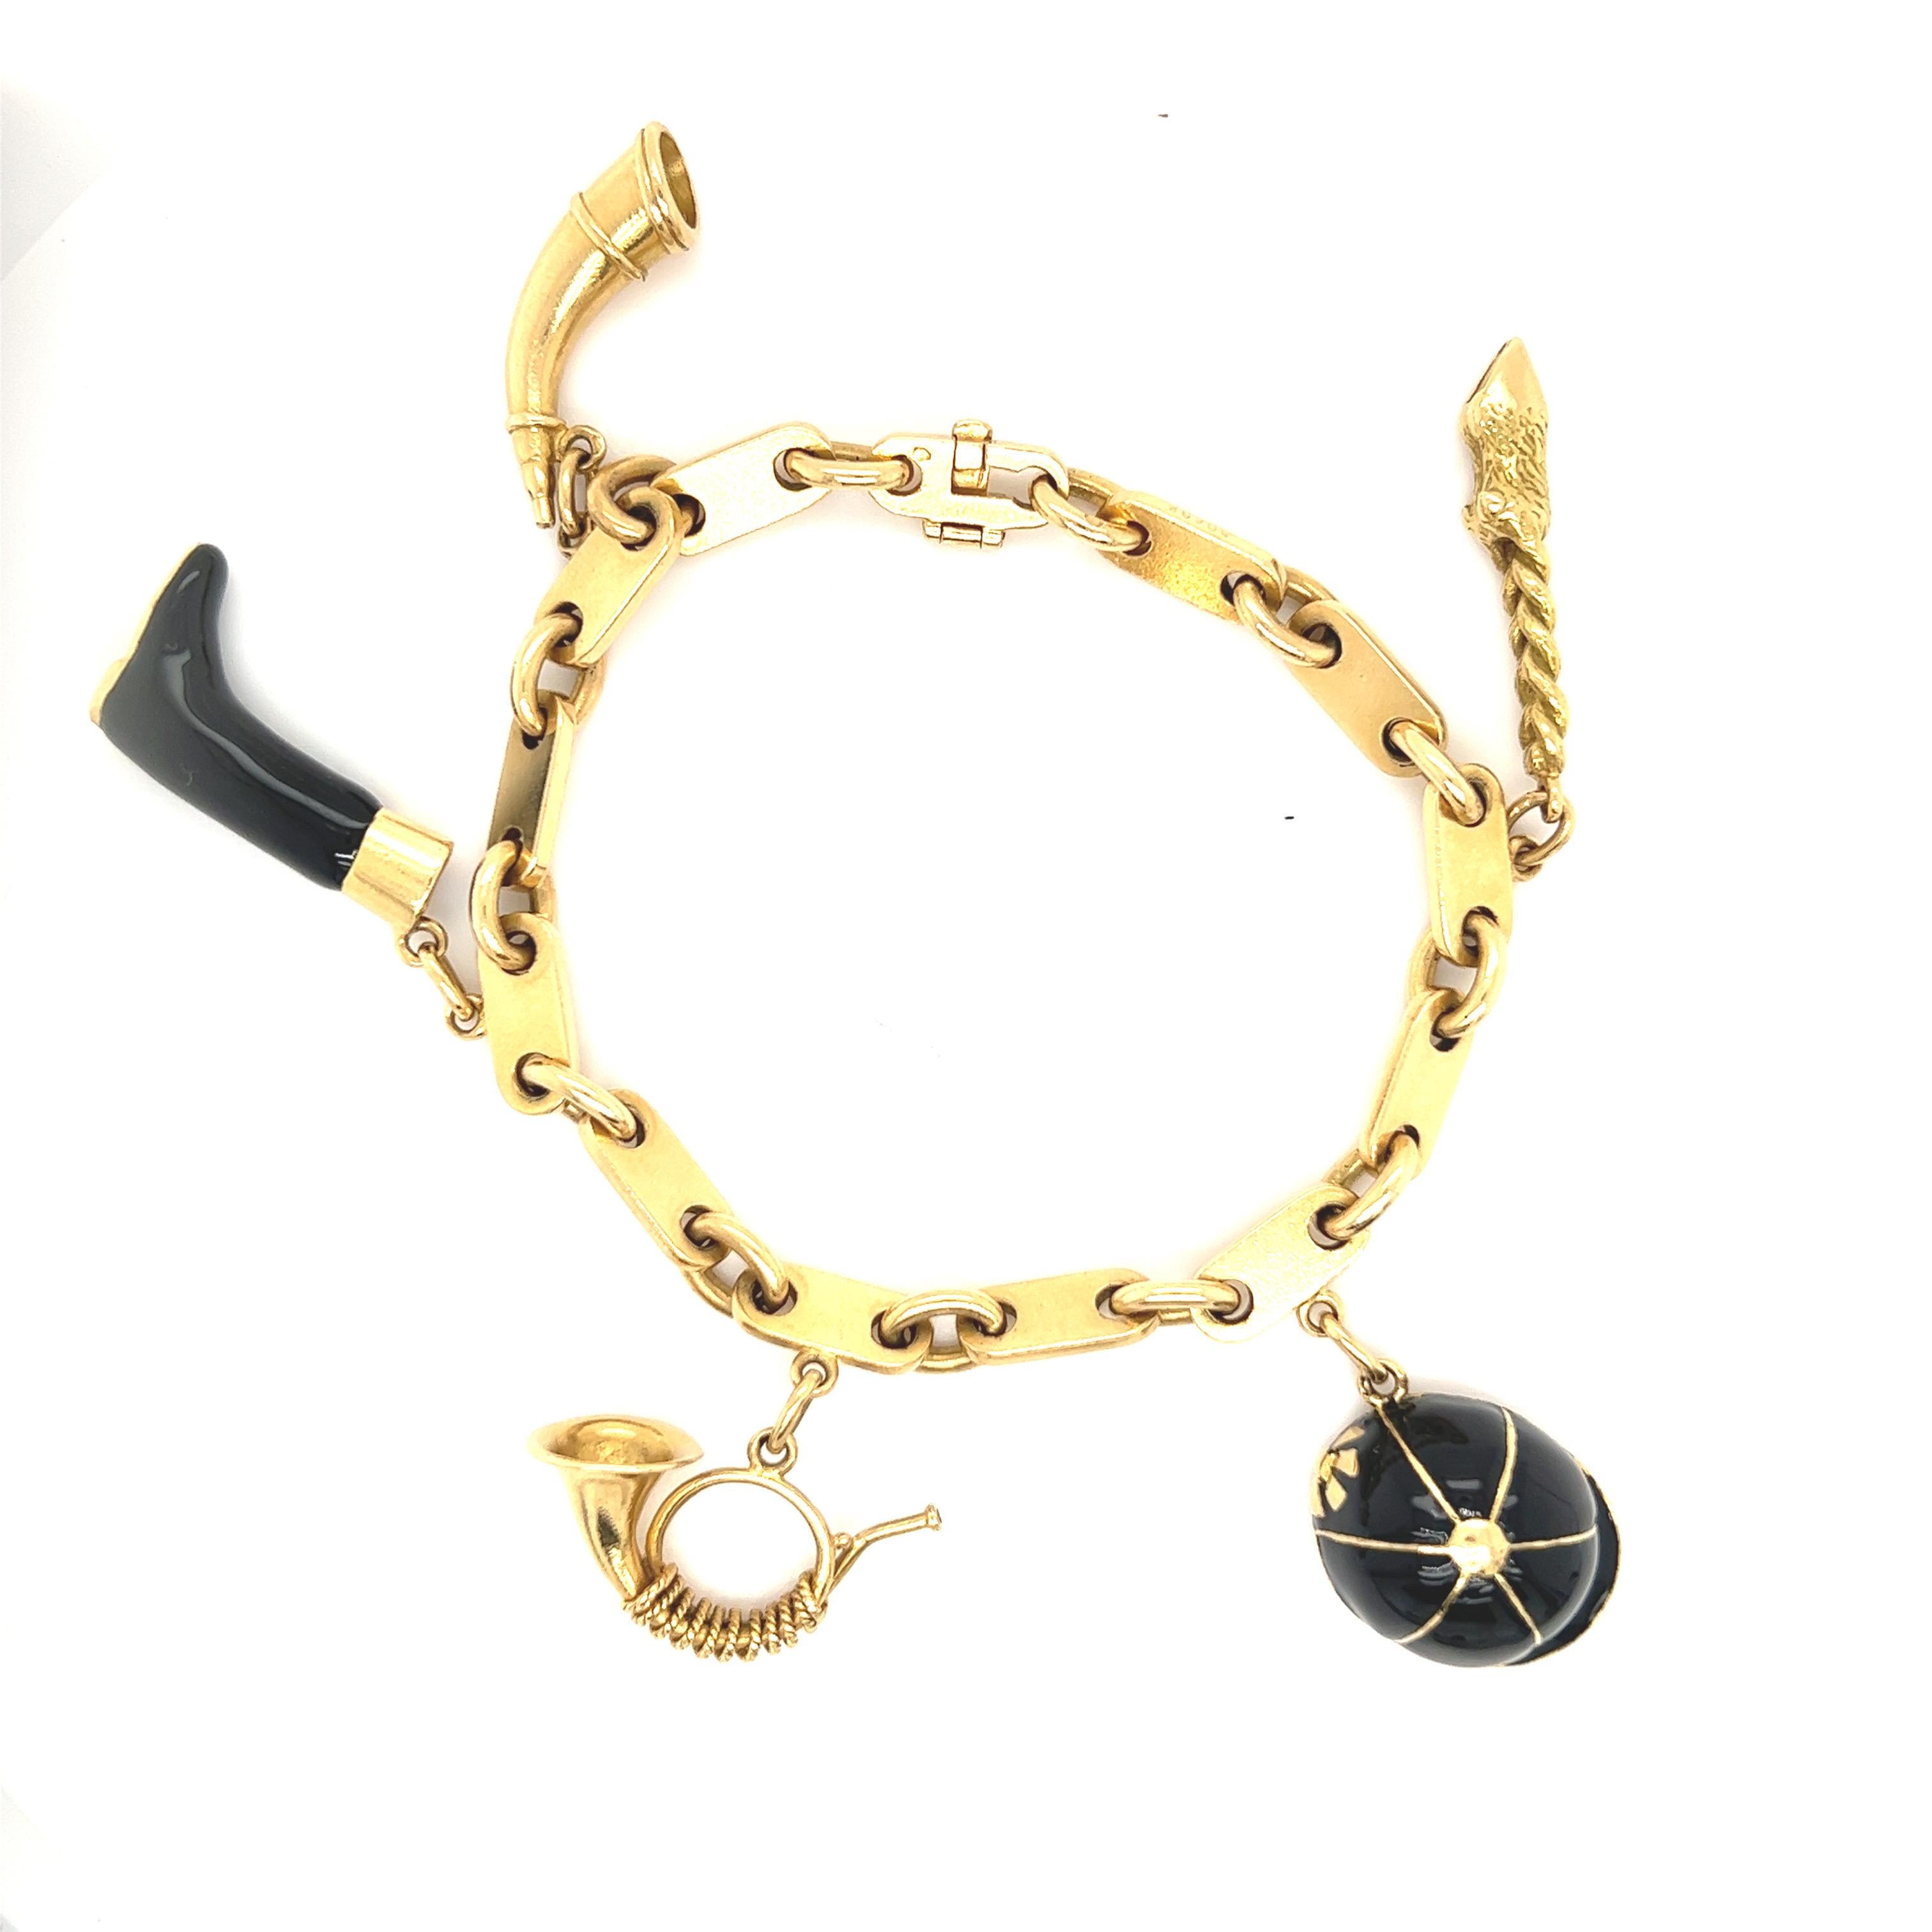 Very Rare Hermes Charm bracelet: 

18ct Yellow Gold Enamel Equestrian Charm Link Bracelet by Hermes.  

Includes a total of 5 Hermes charms:  

Hat: 20mm x 16mm boot 24mm x 14mm 
Horn: 26mm x 8mm 
Horn: 24mm x 15mm 
Lucky Rabbit foot: 31mm x 6mm 